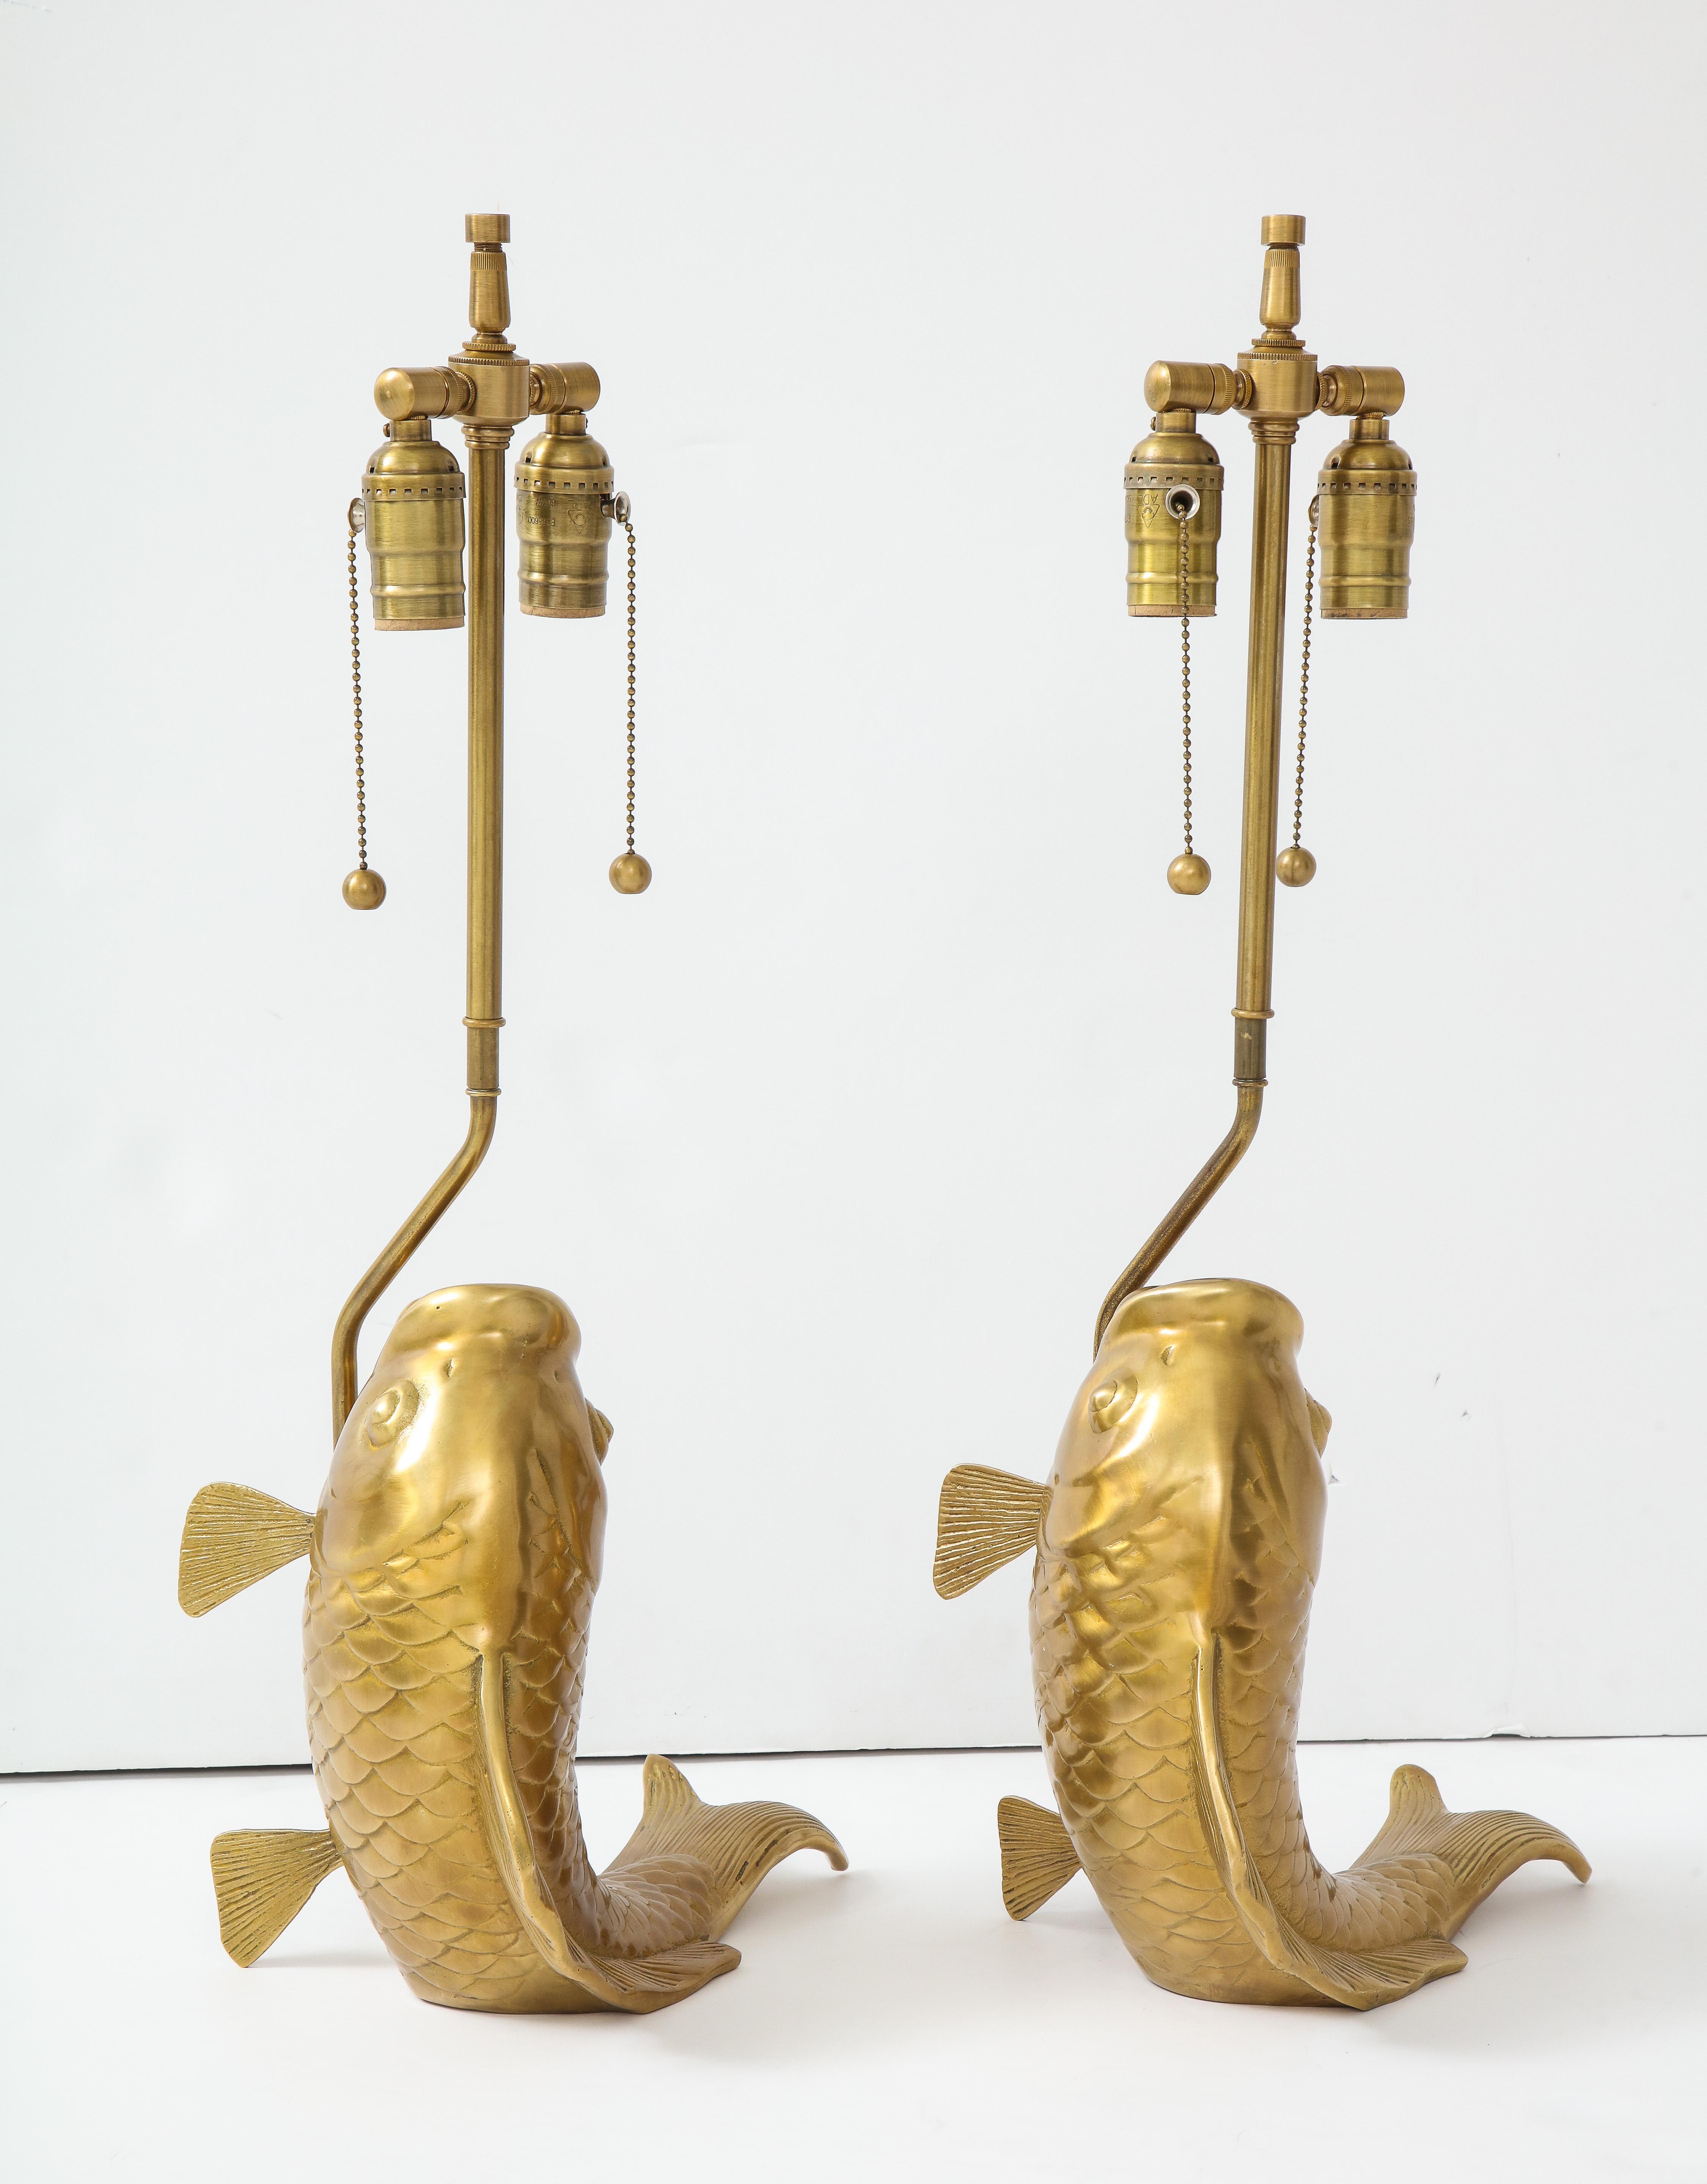 Pair of hand finished cast brass stylized koi fish lamps with detailed scales and fins. Rewired for use in the USA.